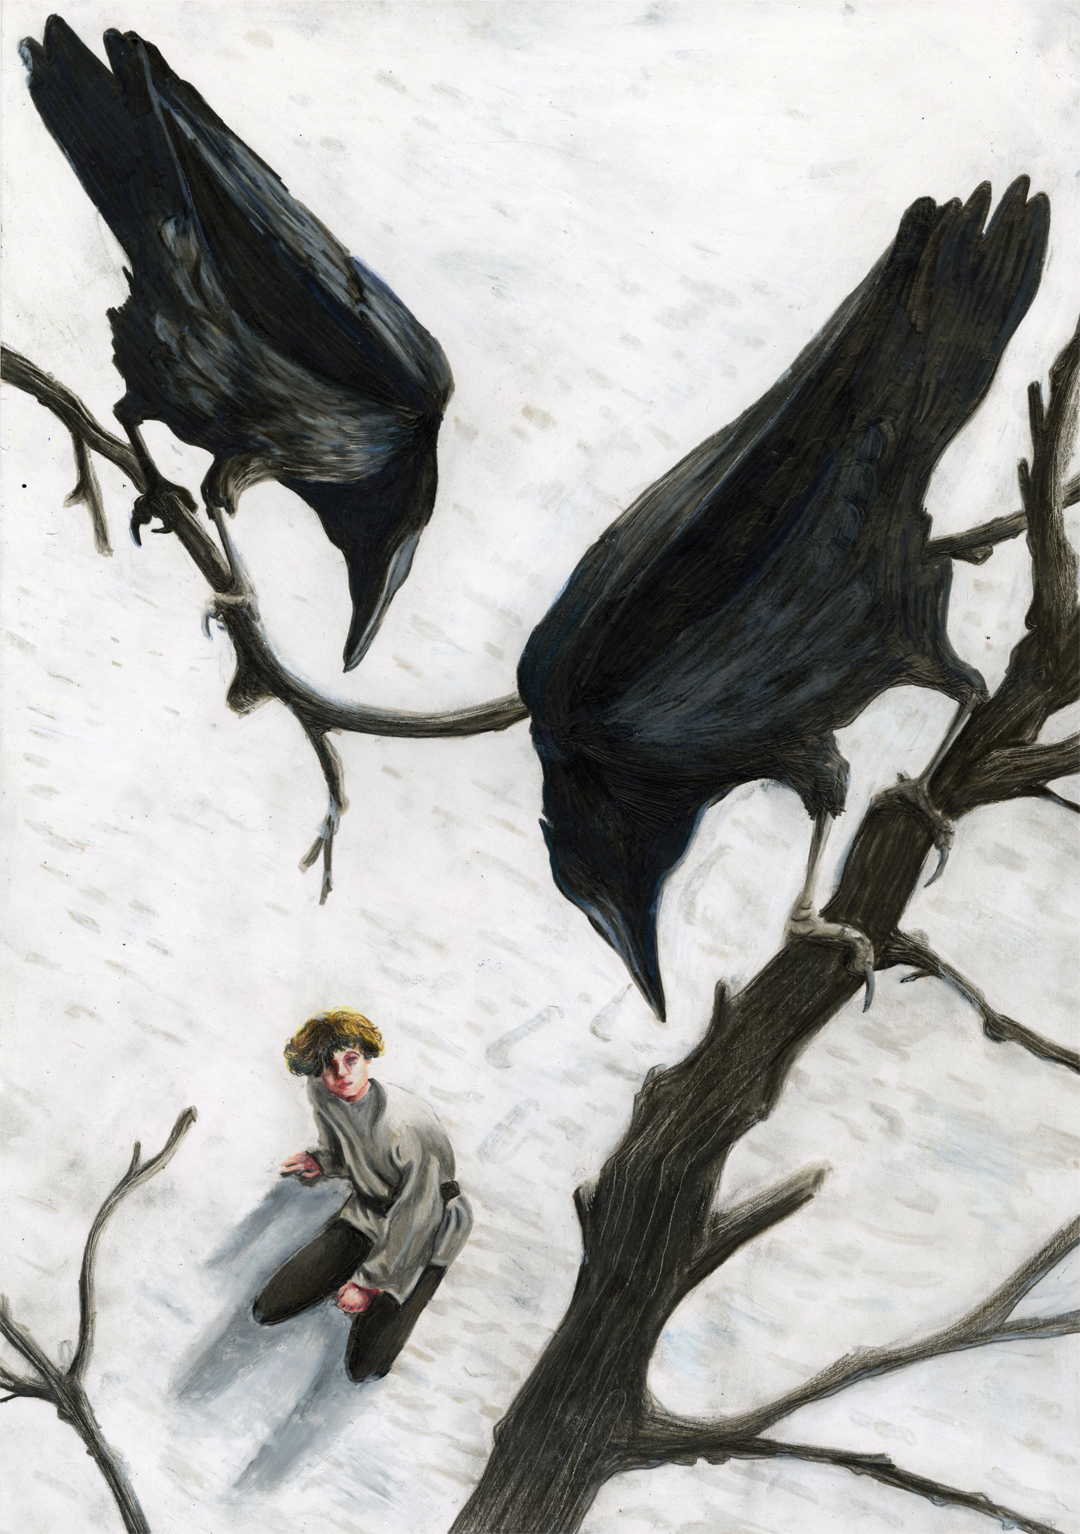 “Narcissus and Goldmund”. Image from a series illustrated for “Narcissus and Goldmund” by Hermann Hesse. Portrays Goldmund kneeling in the snow, surrounded by scavenging crows.